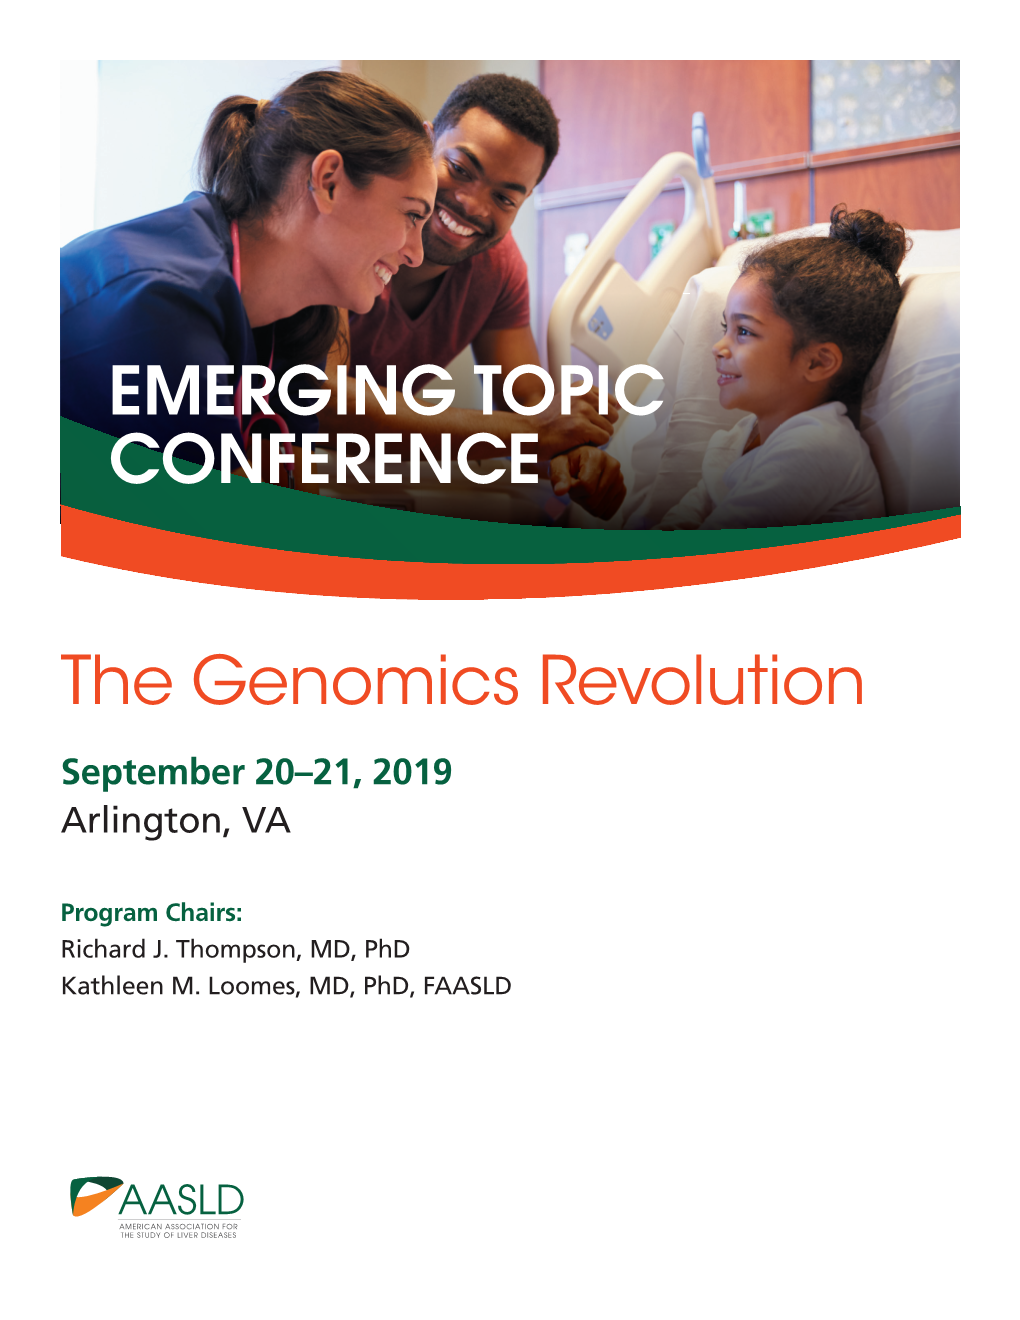 The Genomics Revolution EMERGING TOPIC CONFERENCE